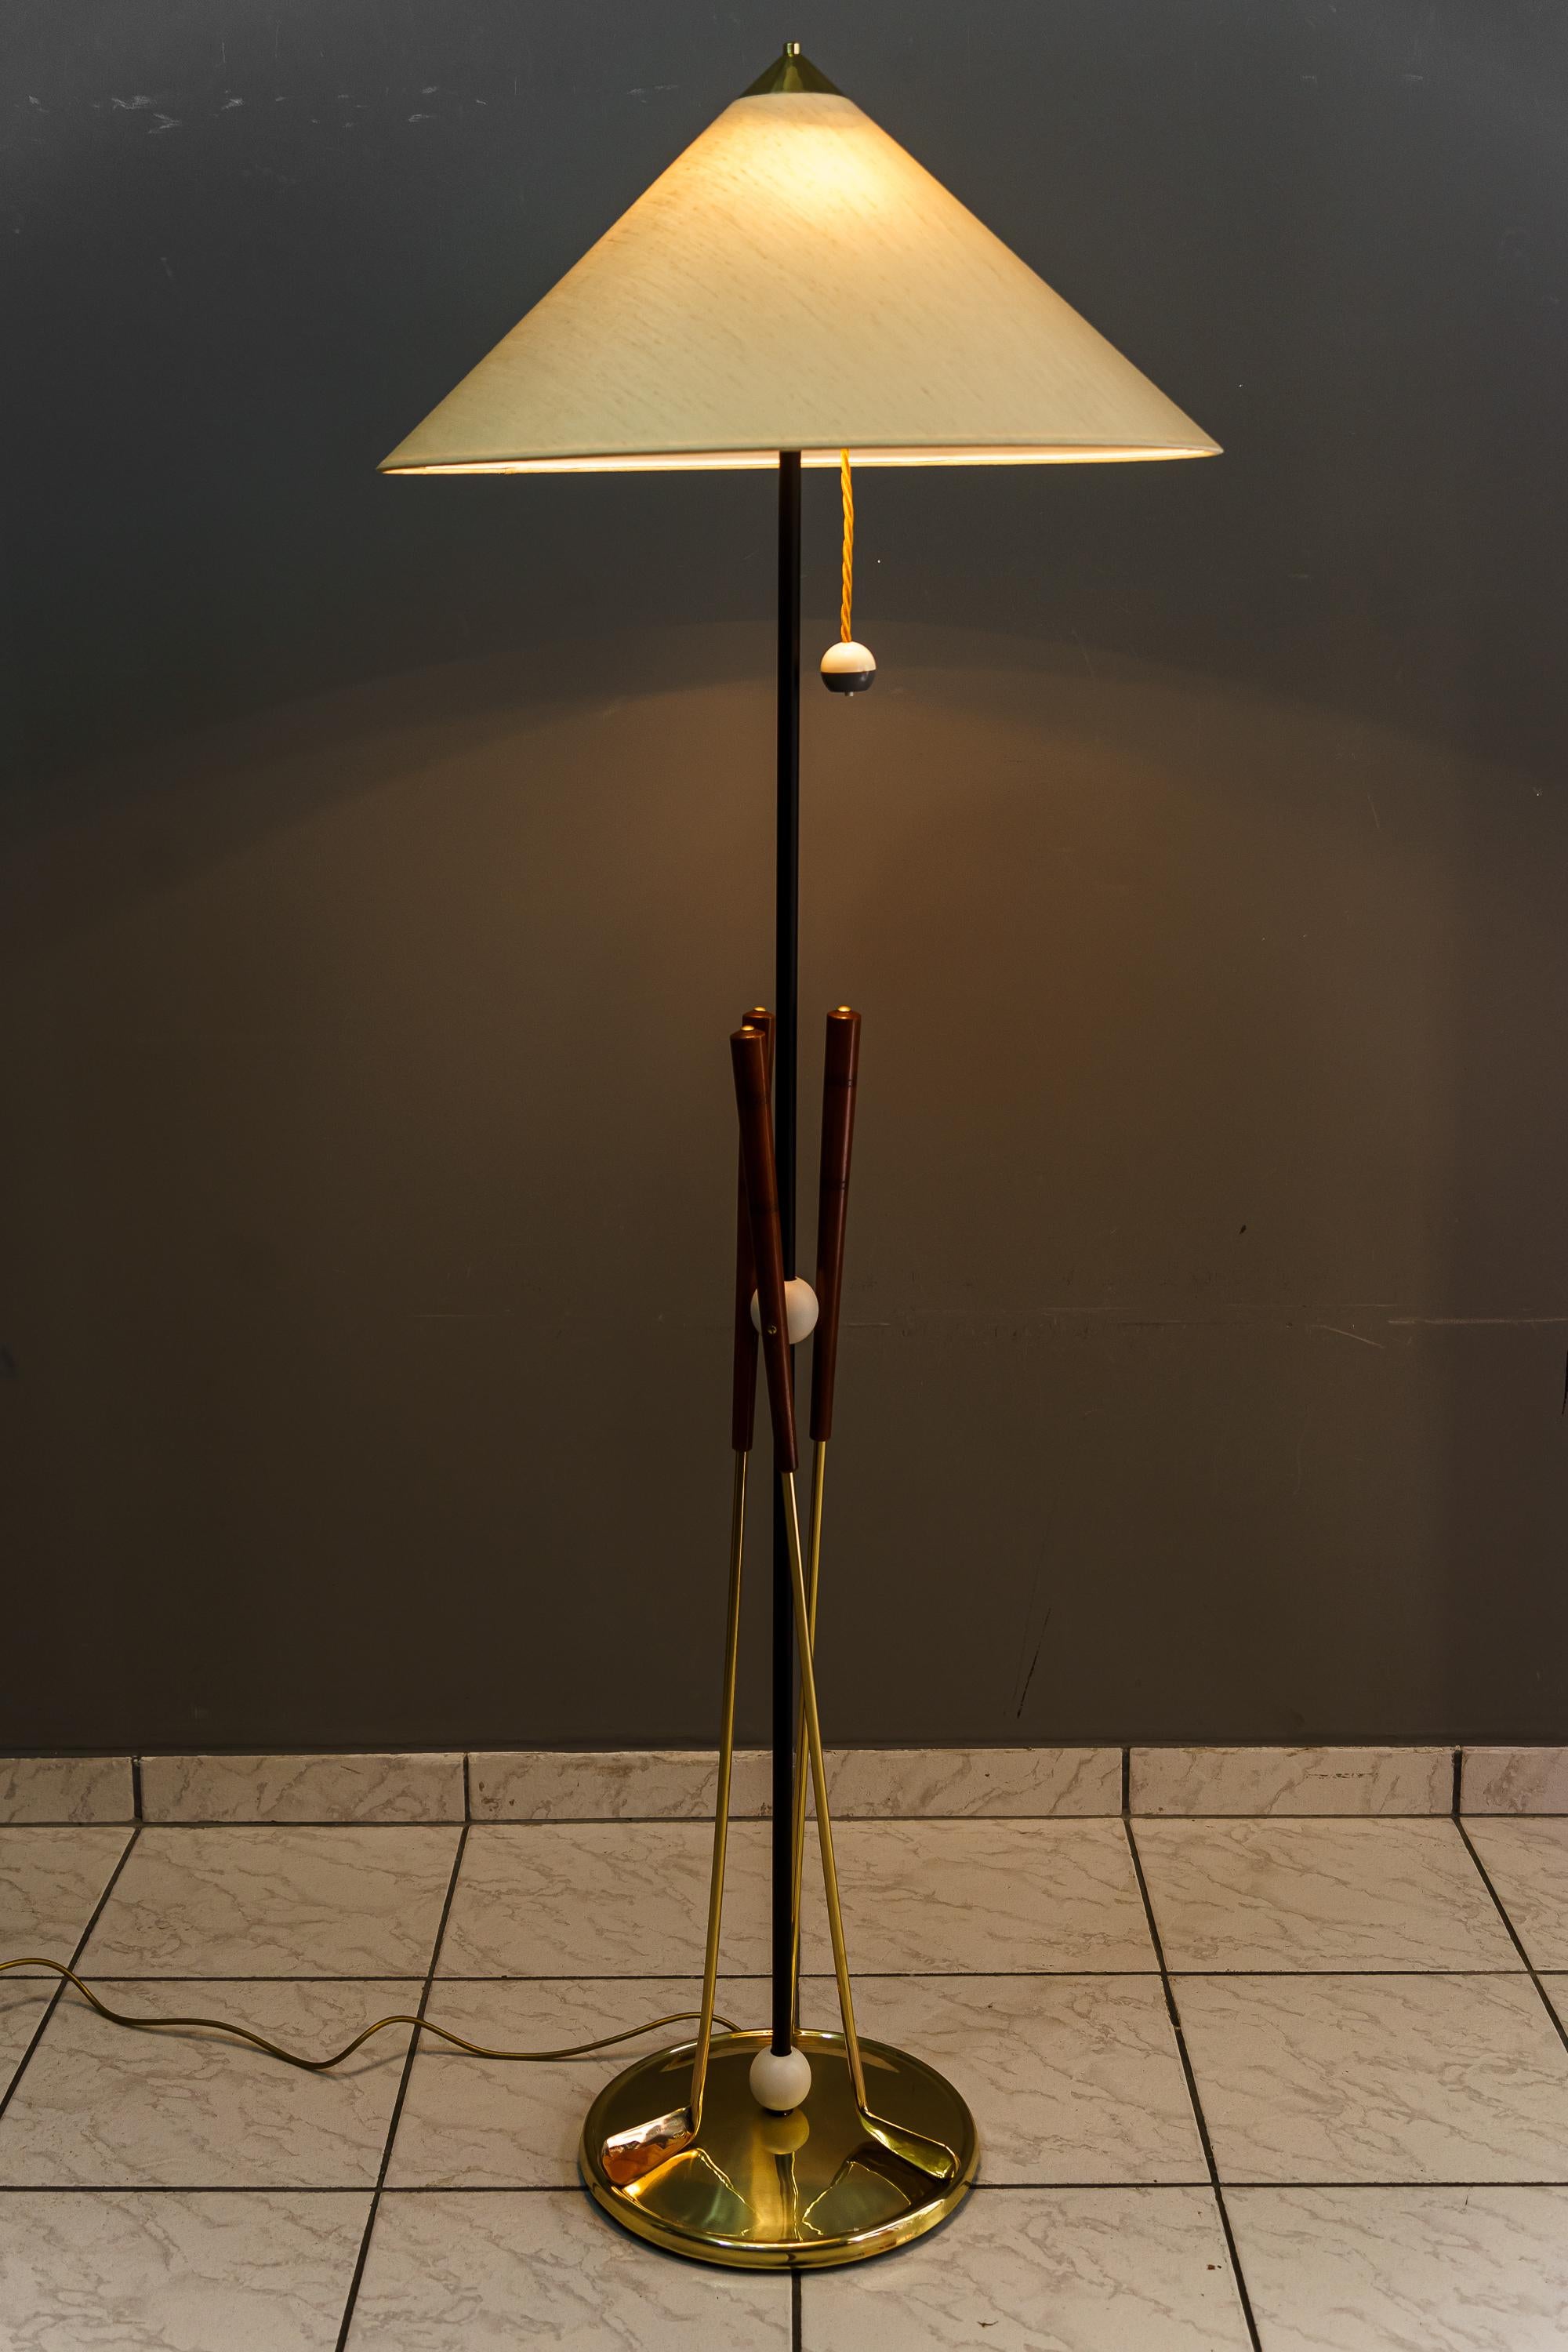 Floor lamp with 3 golf rackets italian around 1950s
Brass polished and stove enameled
Wood polished 
The fabric shade is replaced ( new )